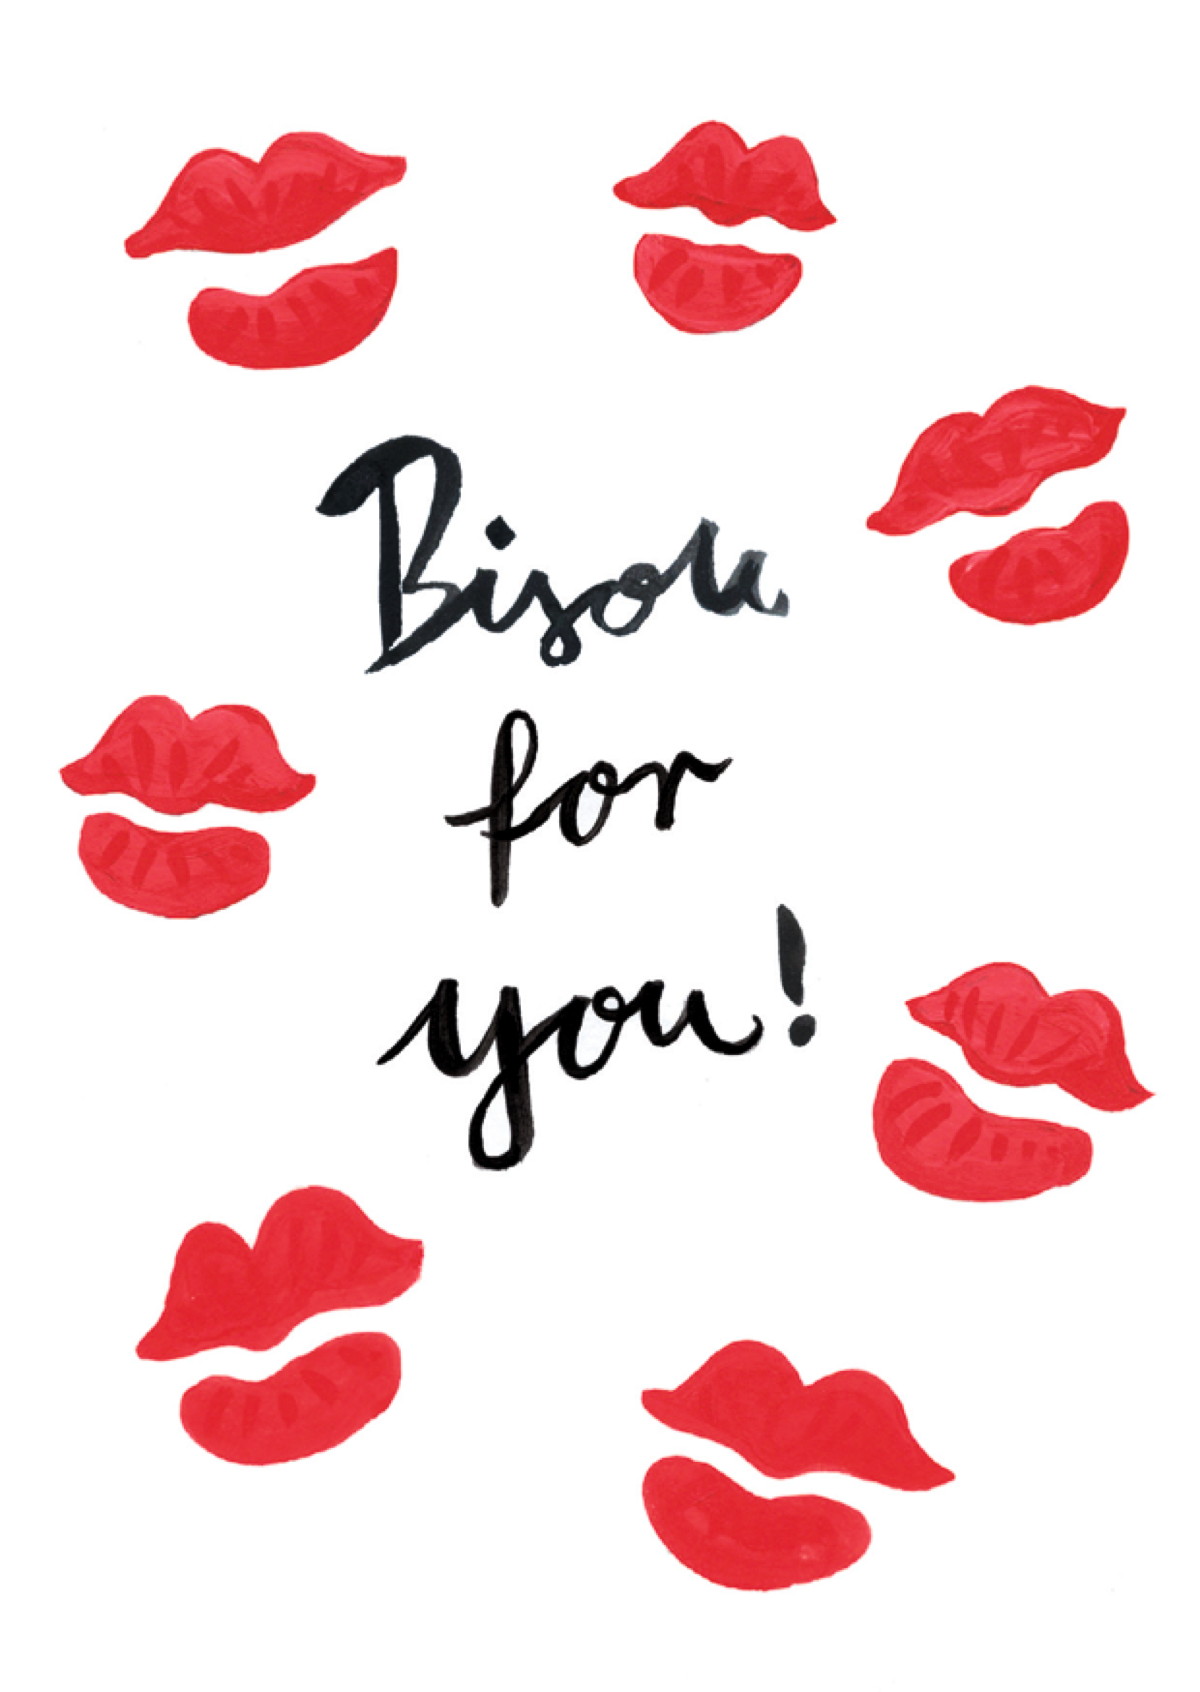 Bisou for you